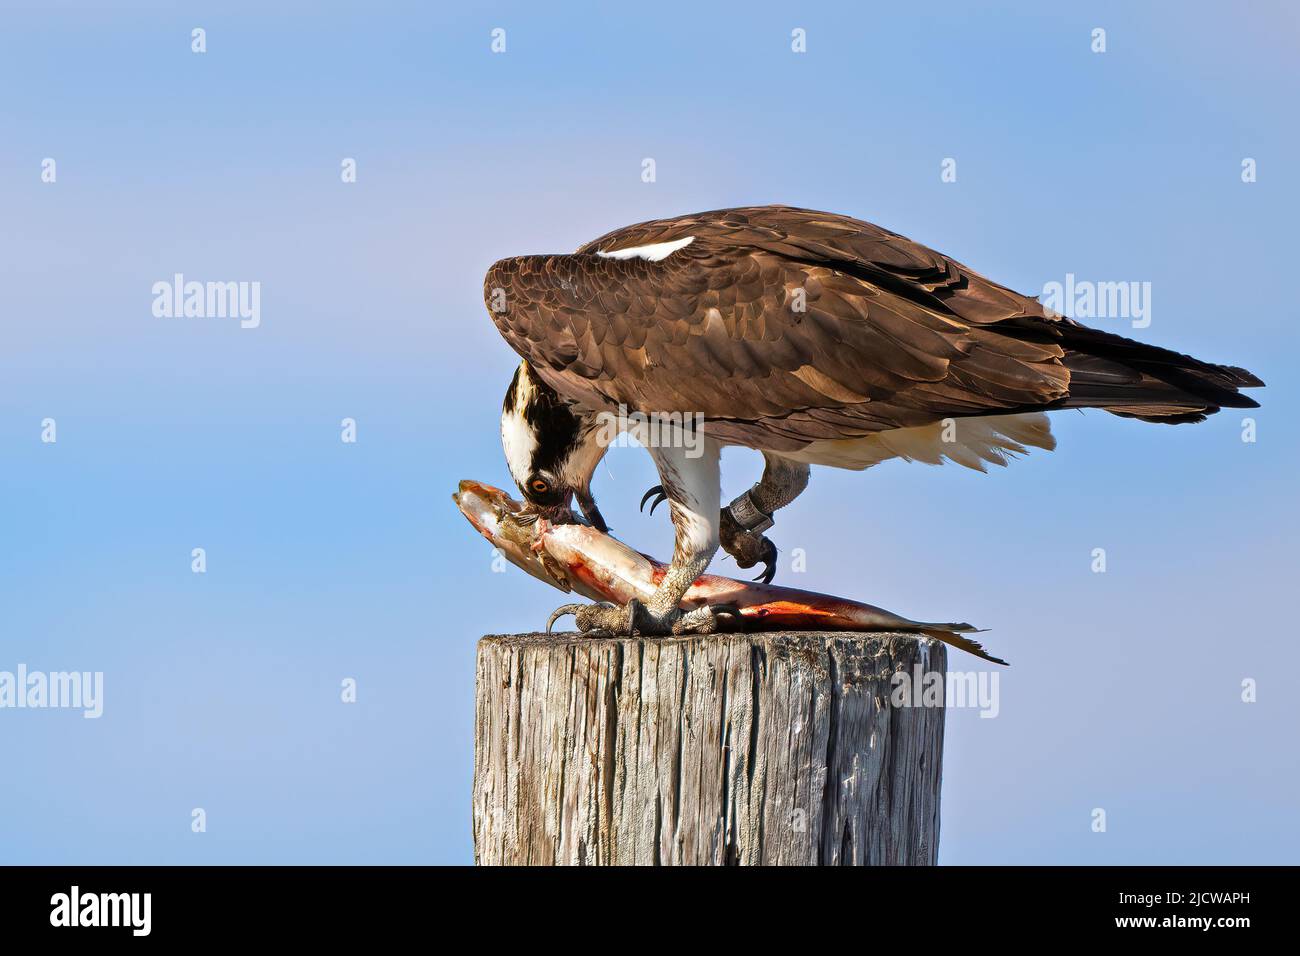 An Osprey Eating a Large Fish Stock Photo